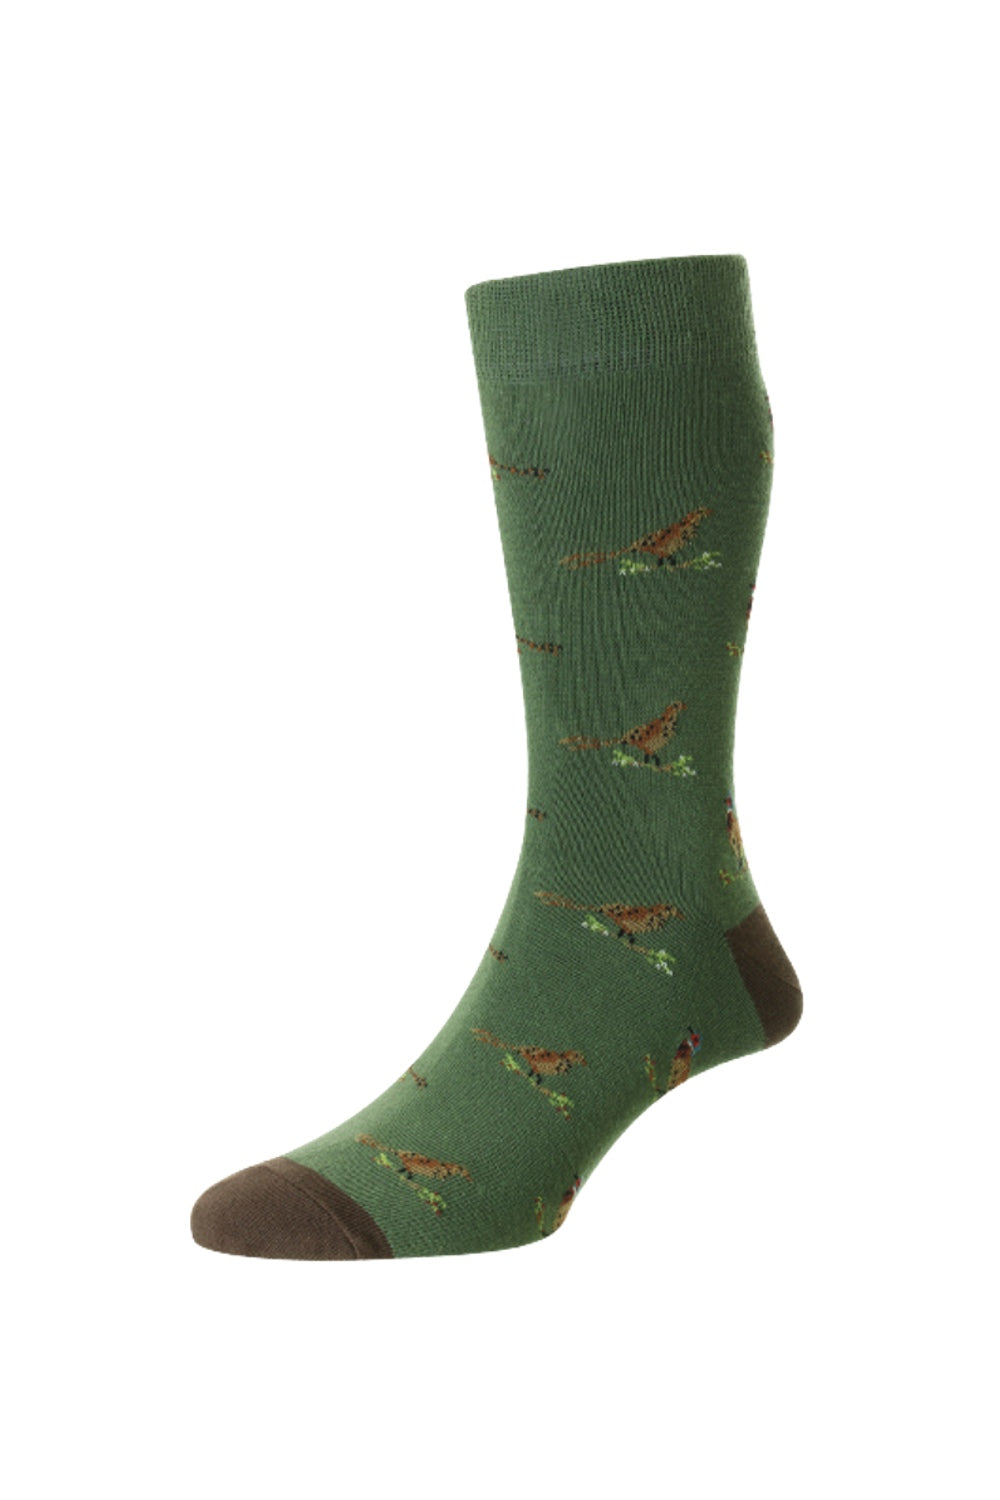 HJ Hall Pheasant and Grouse Motif Rich Cotton Socks in Moss  